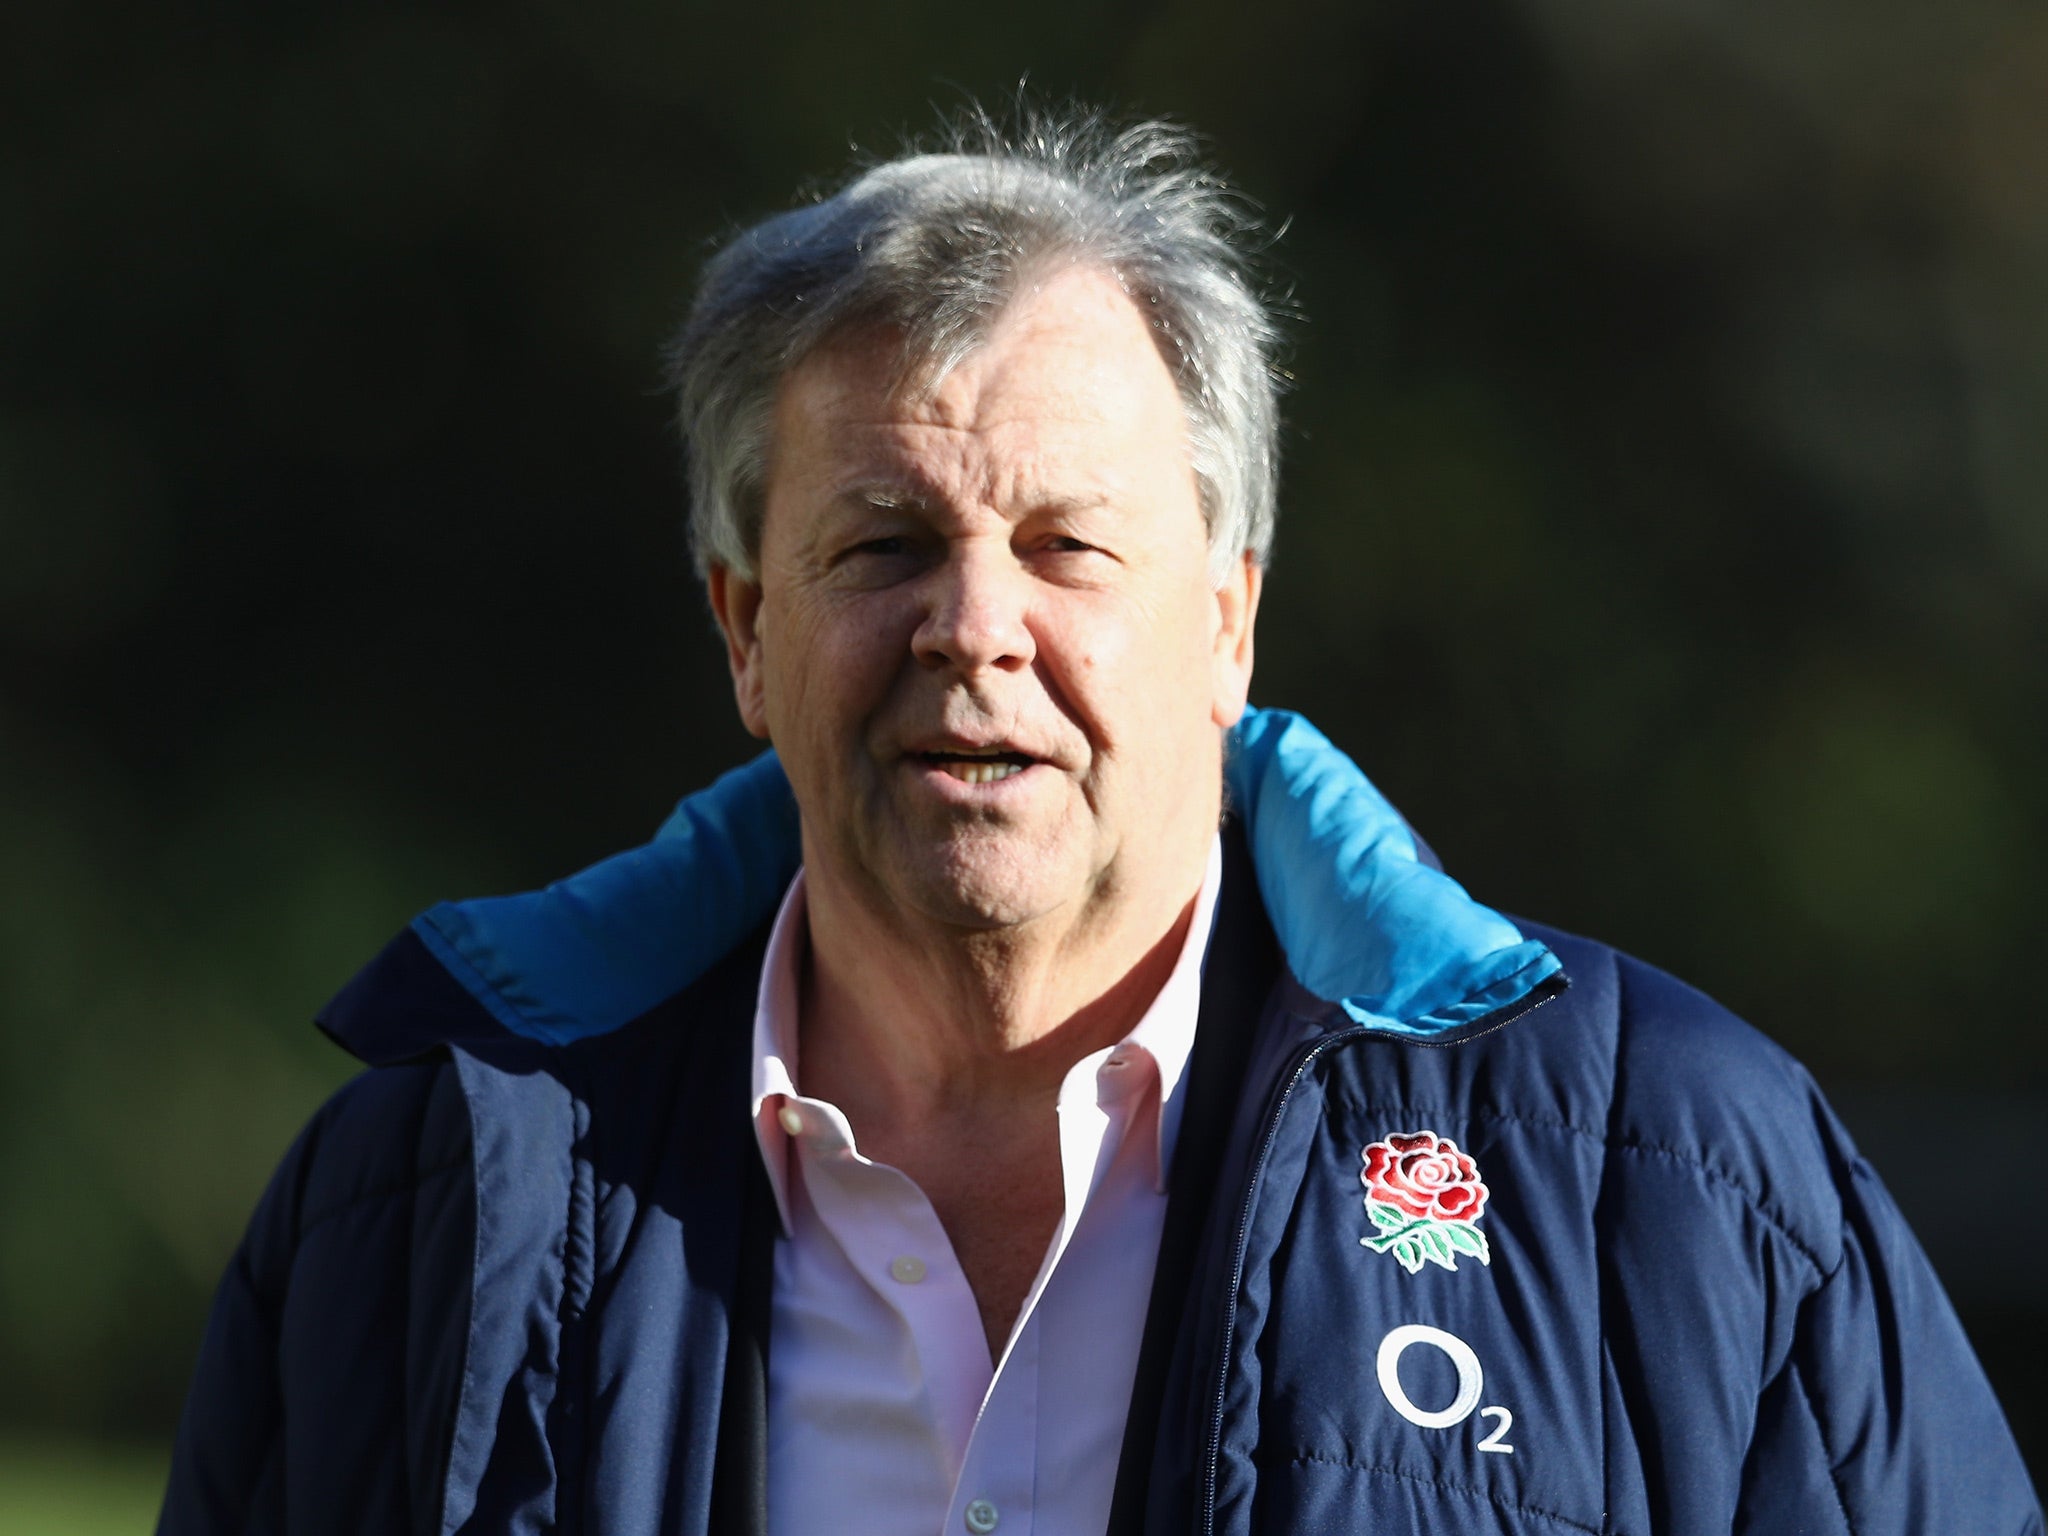 Ian Ritchie says say the RFU is 'extremely proud' of its record in women's rugby